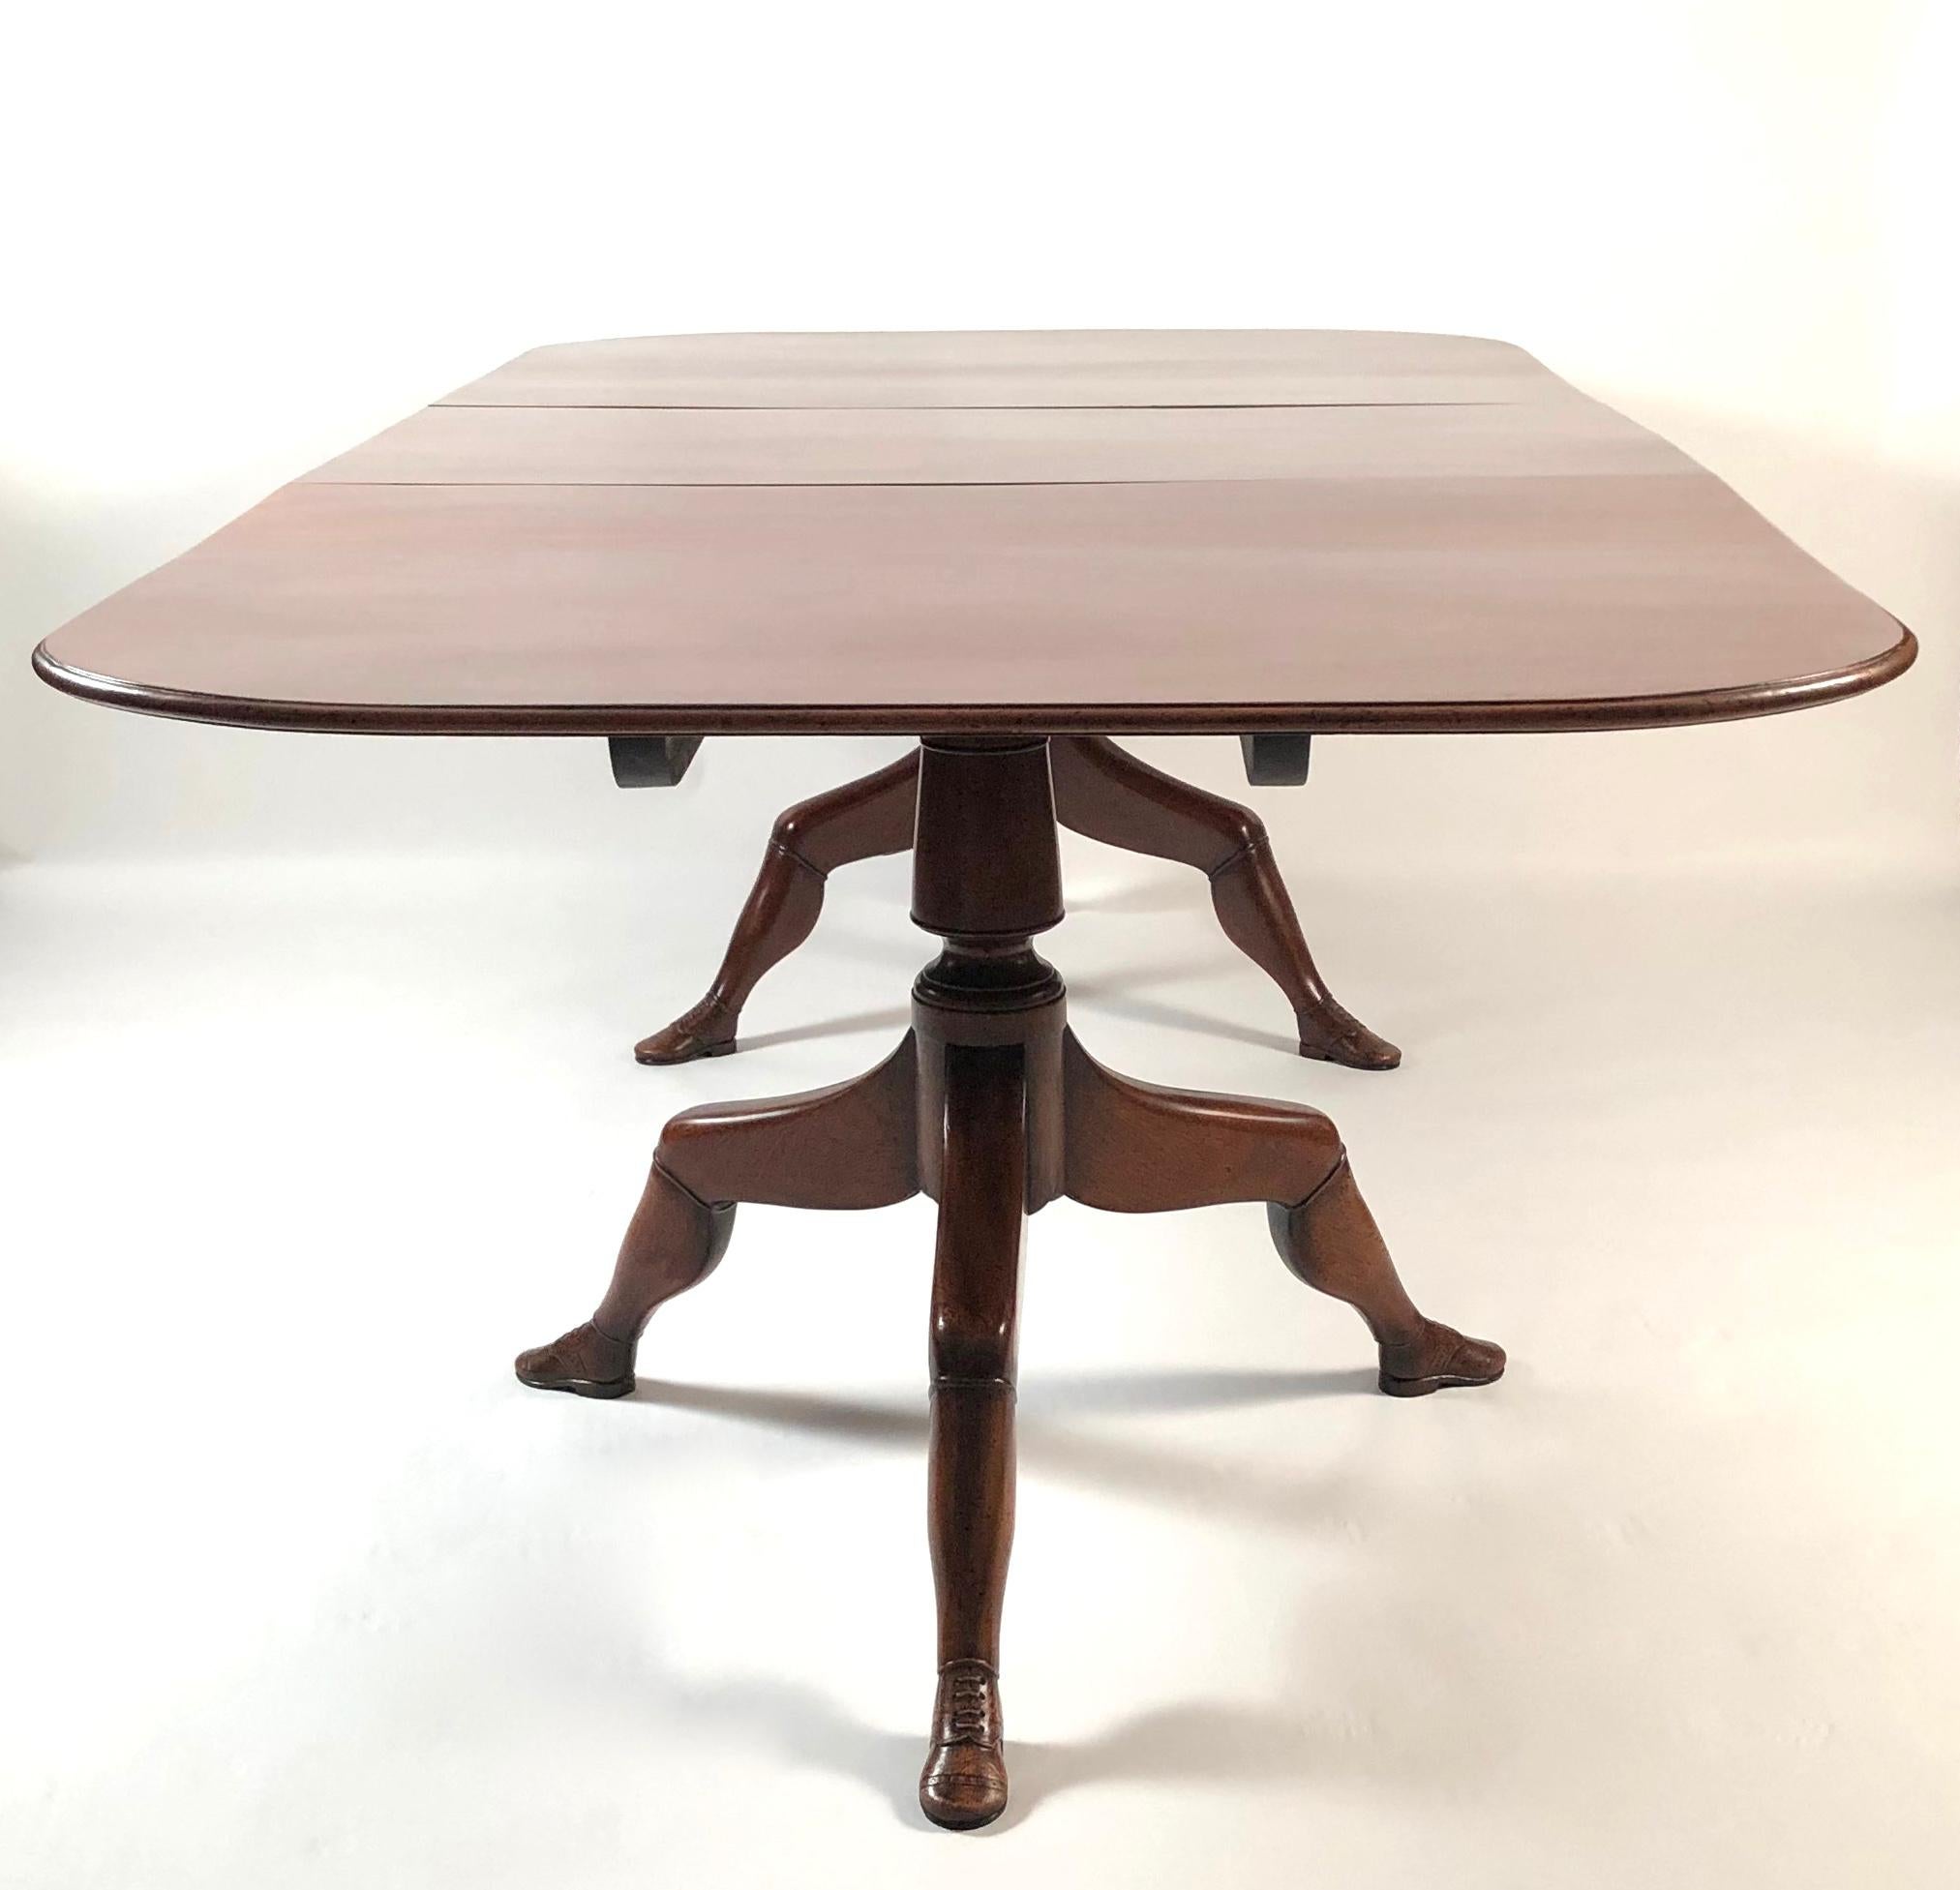 A fine quality and unusual mahogany extension dining table from the Isle of Man, with rich, deep color, the rectangular top with rounded corners and bullnose edge, supported by two pedestals raised on tripod legs, carved as human legs wearing carved